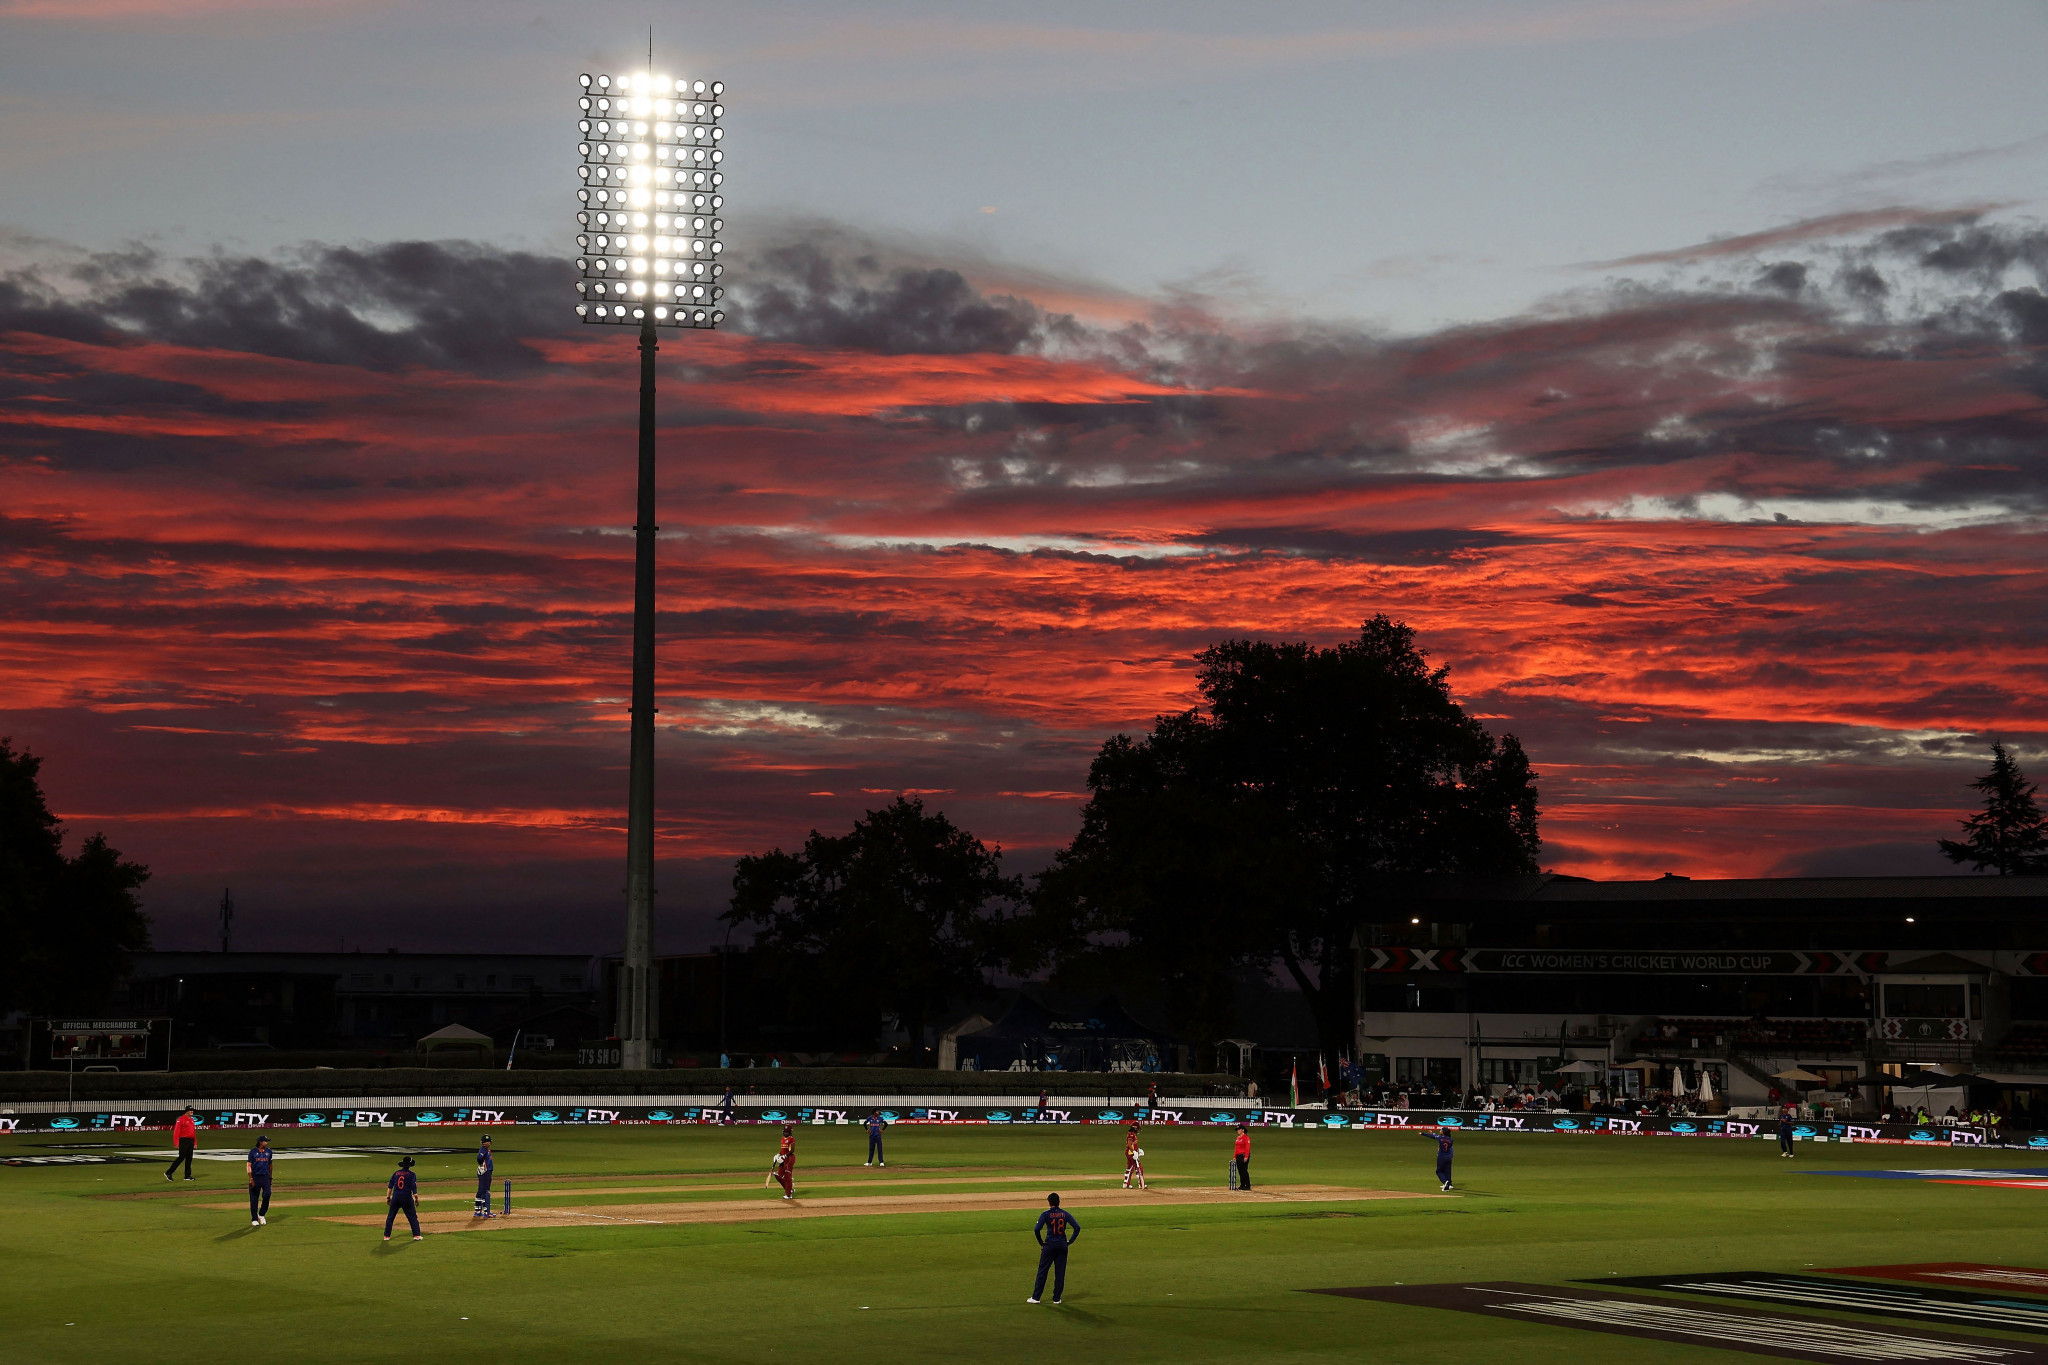 West Indies were always struggling to chase down India's large total of 317-9 at the Women's Cricket World Cup under the floodlights in Hamilton after they lost opening batter Deandra Dottin ©Getty Images 